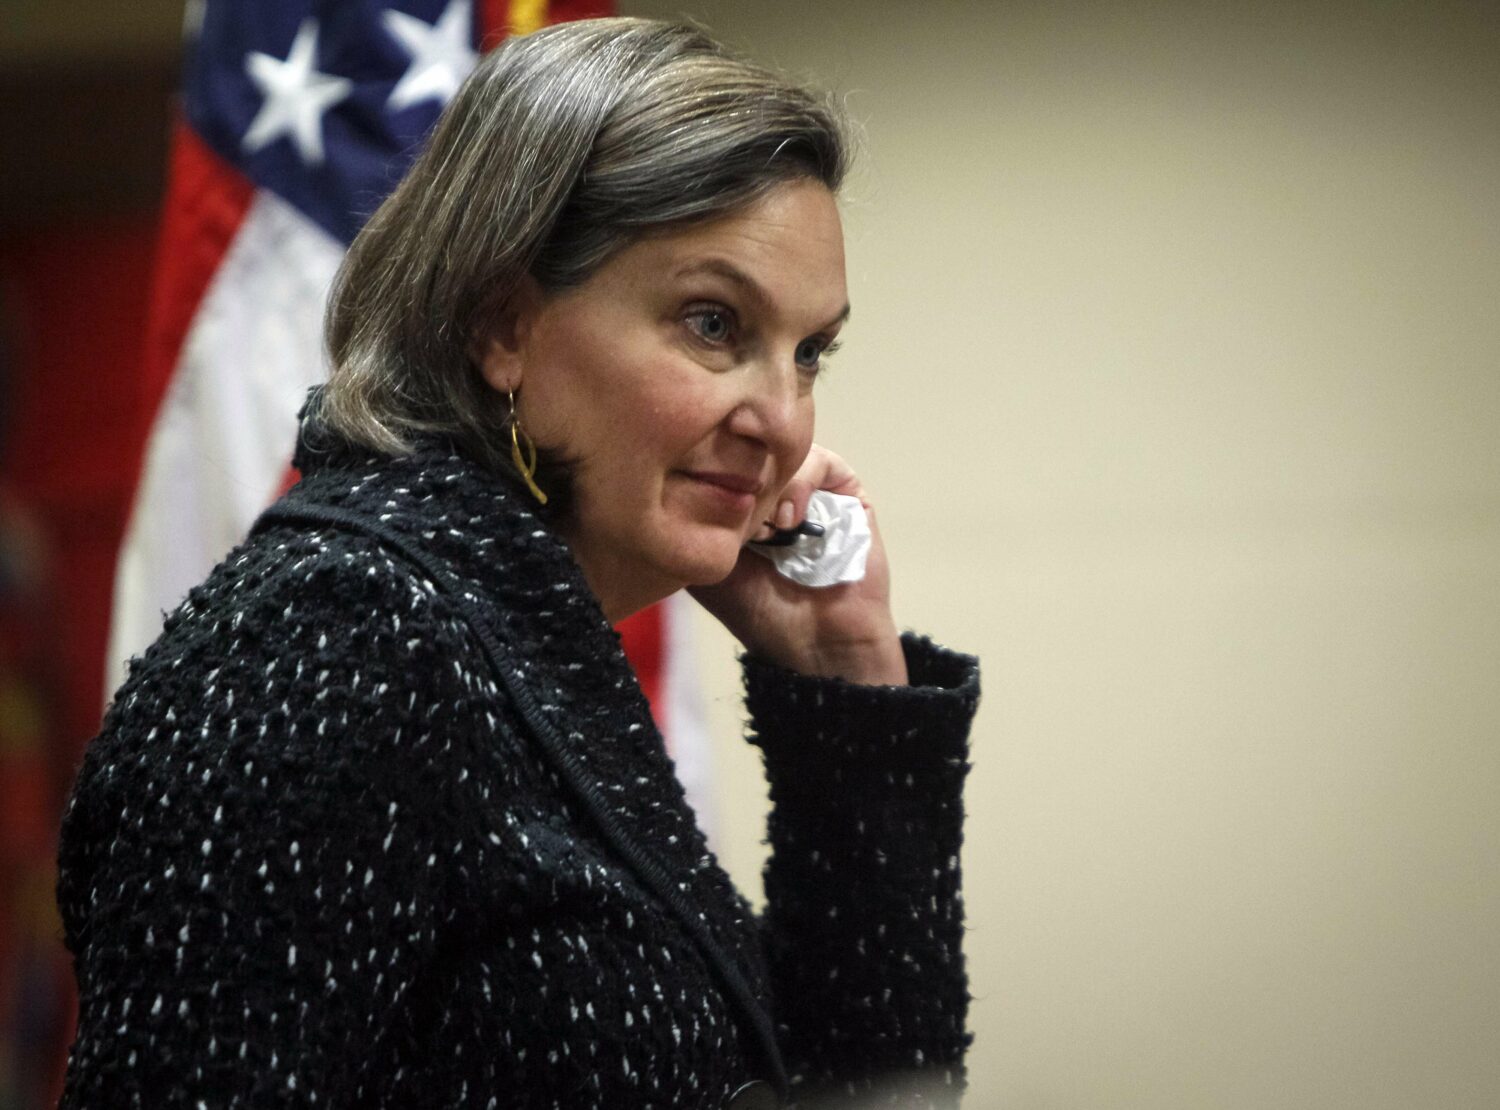 U.S. Assistant Secretary of State Victoria Nuland arrives at a news conference at the U.S. embassy in Kiev